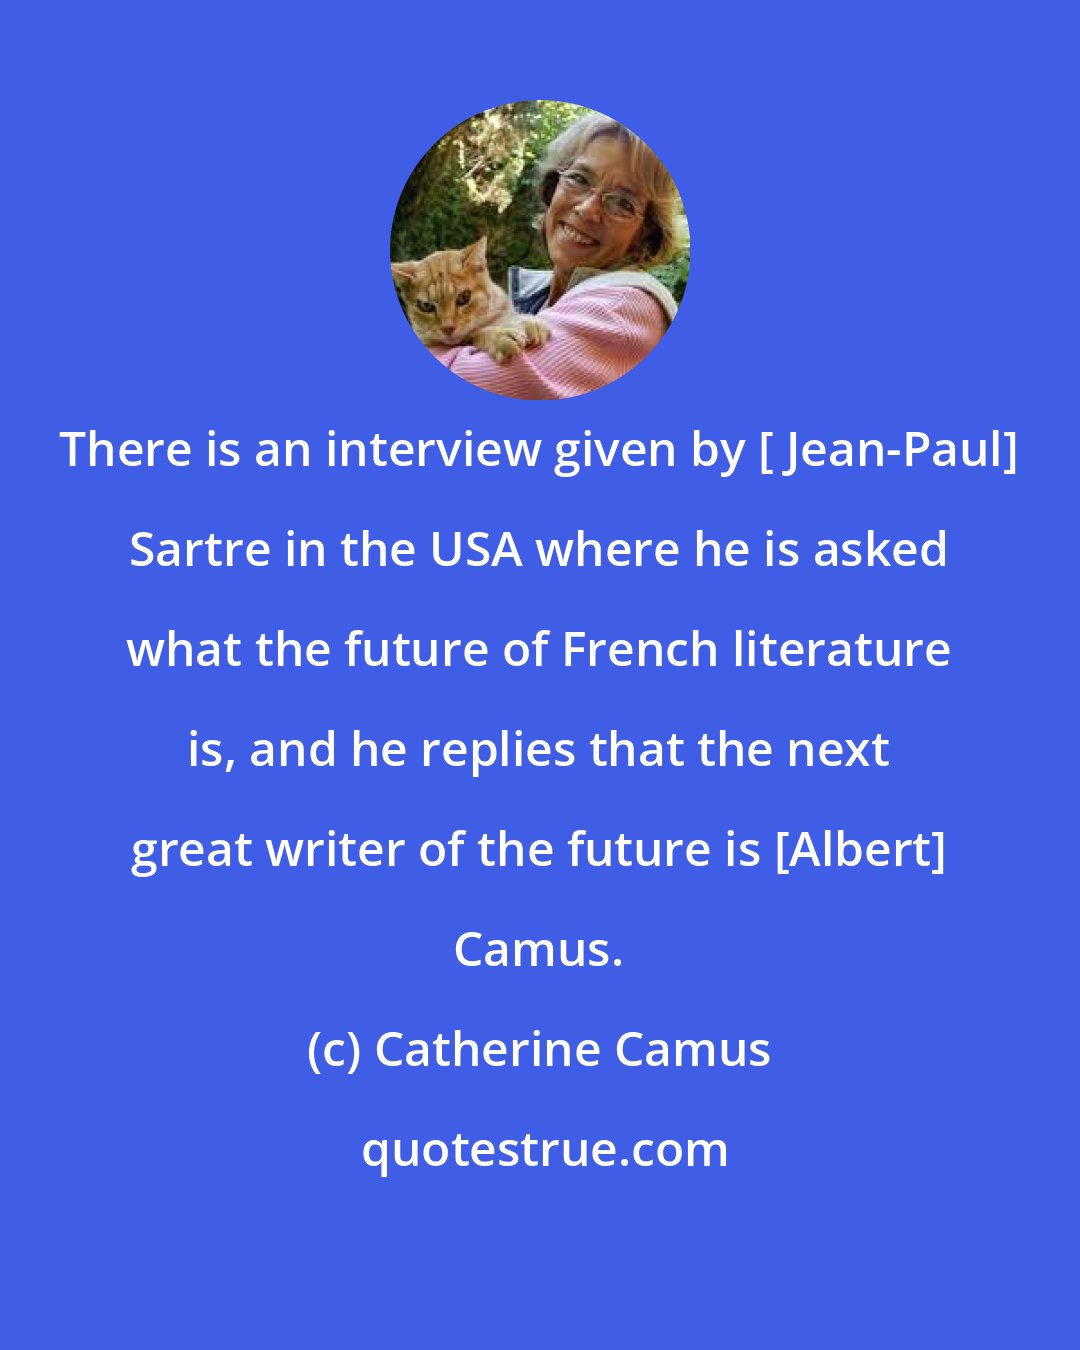 Catherine Camus: There is an interview given by [ Jean-Paul] Sartre in the USA where he is asked what the future of French literature is, and he replies that the next great writer of the future is [Albert] Camus.